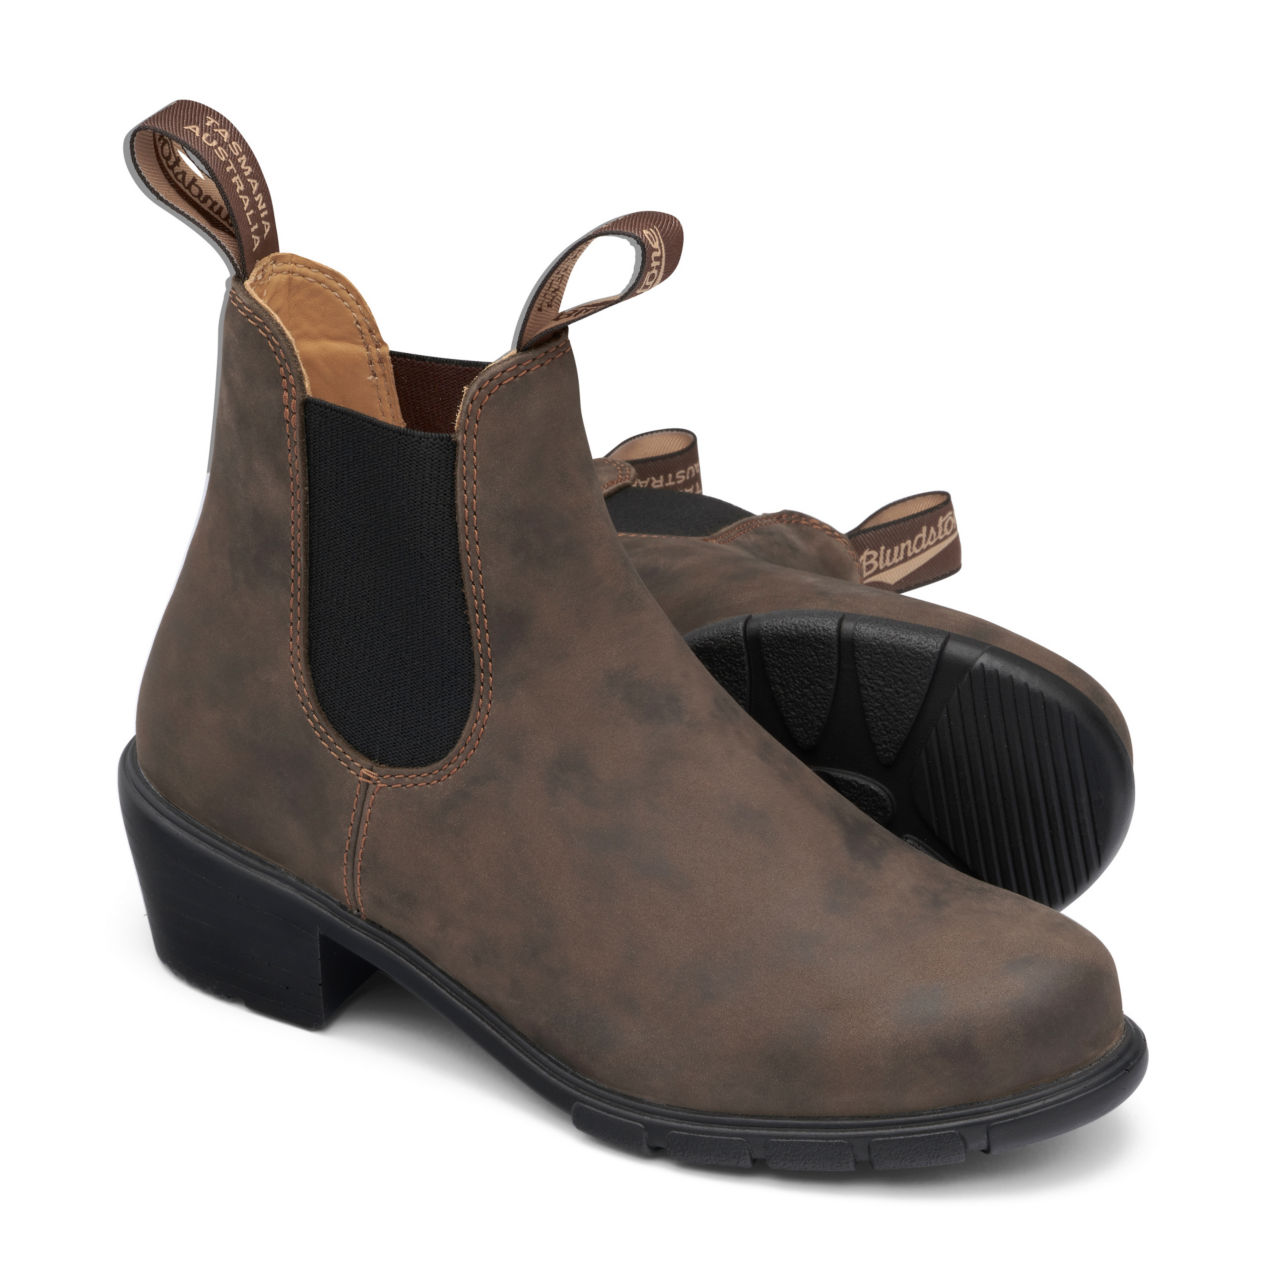 Women’s Blundstone® 1677 Heeled Boots - RUSTIC BROWN image number 2